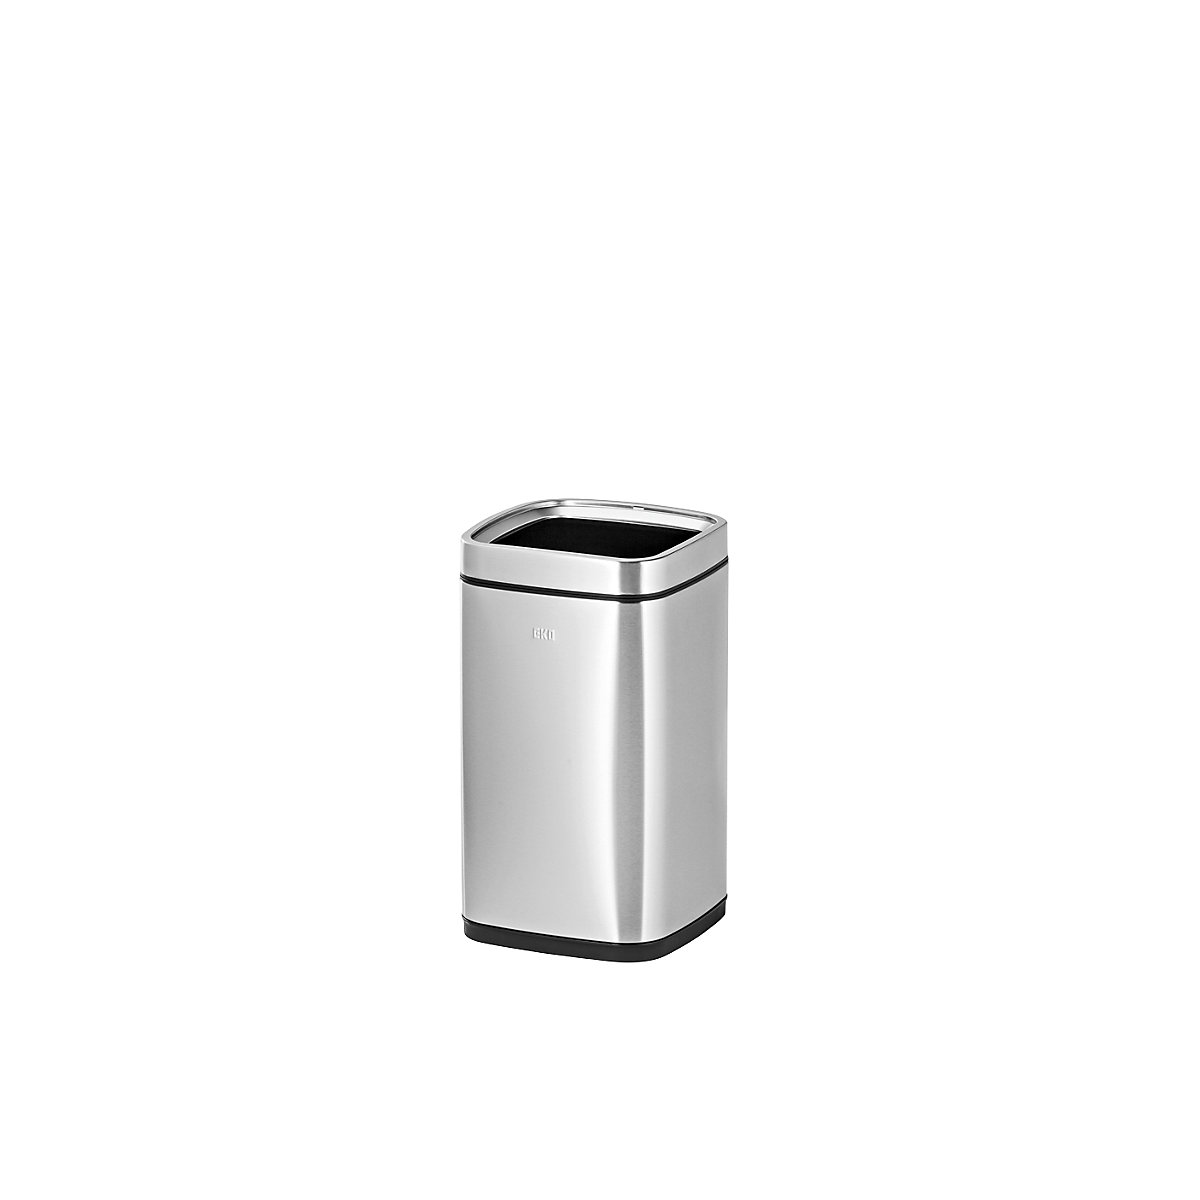 Waste paper bin with inner container – EKO, capacity 12 l, stainless steel-4